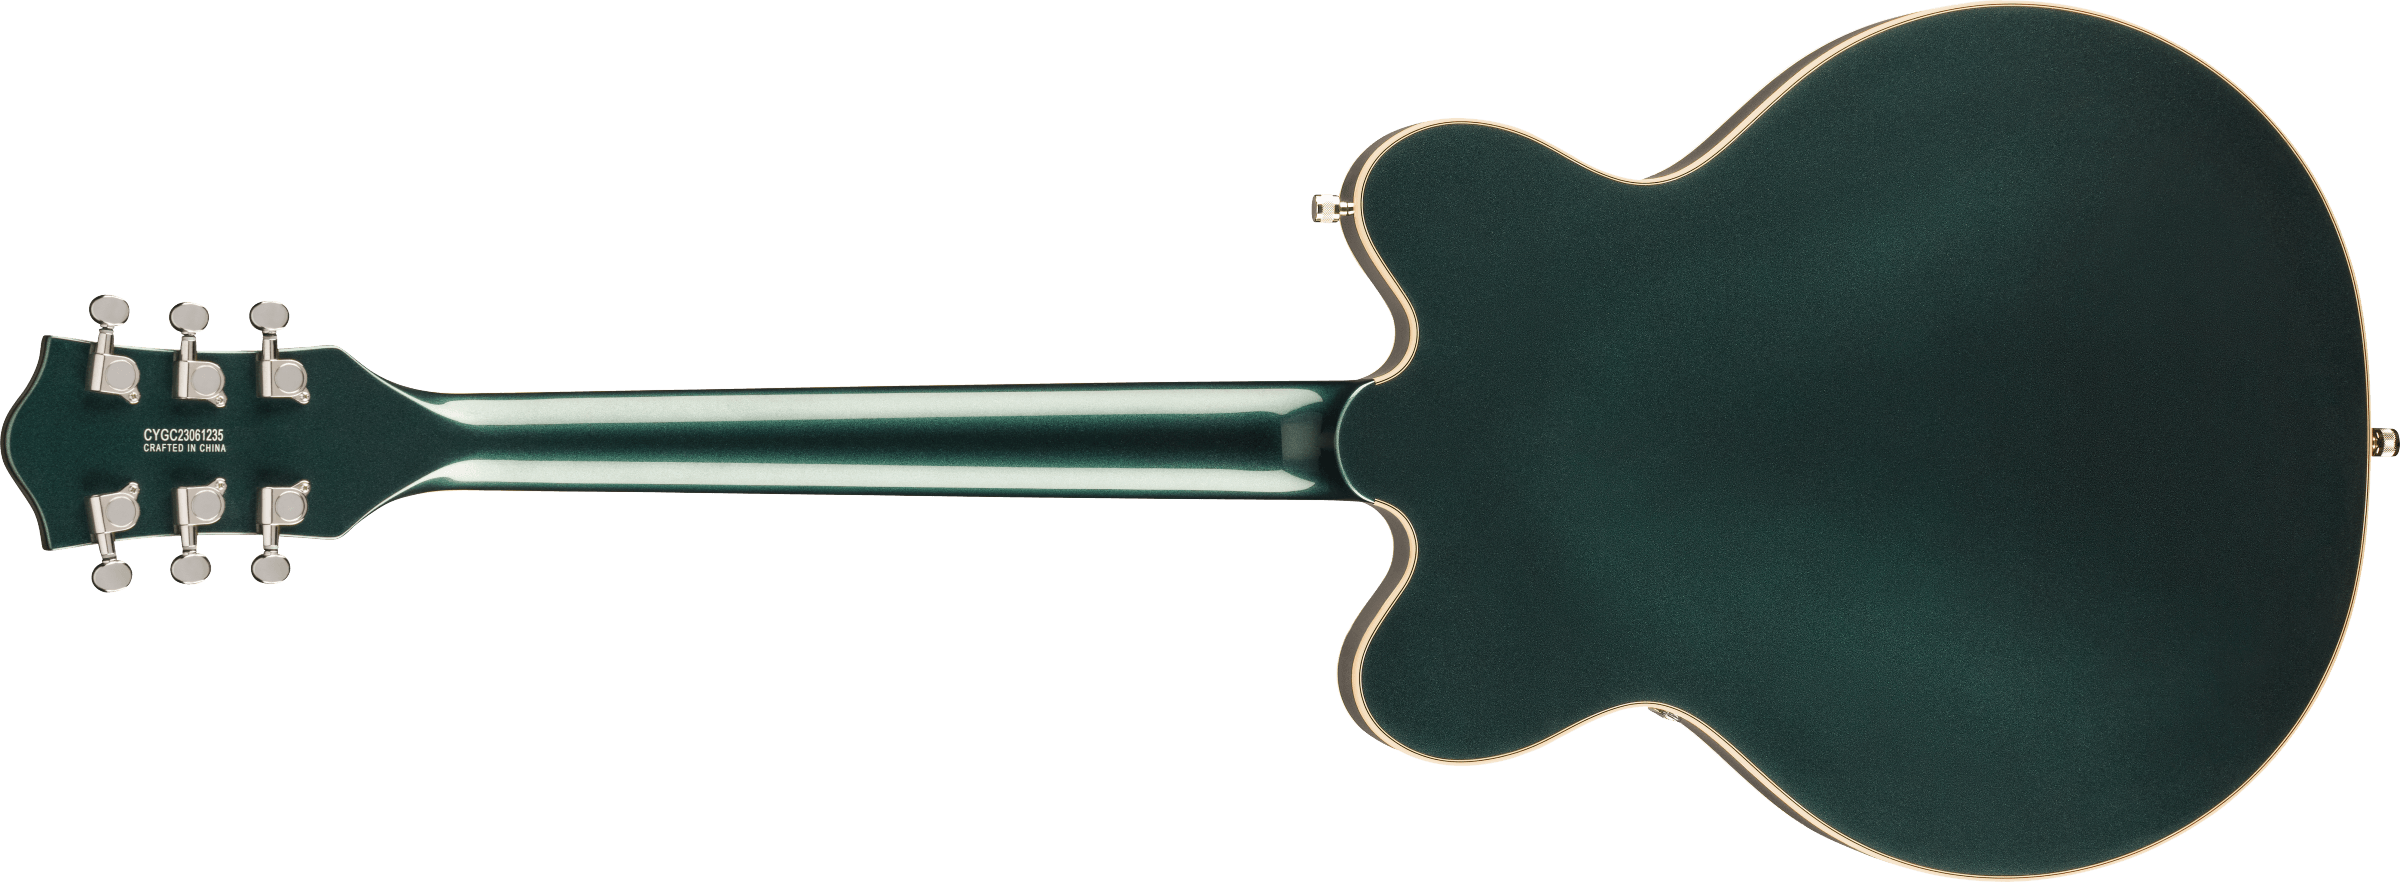 Gretsch G5622T Electromatic® Center Block Double-Cut with Bigsby Cadillac Green 2508200546